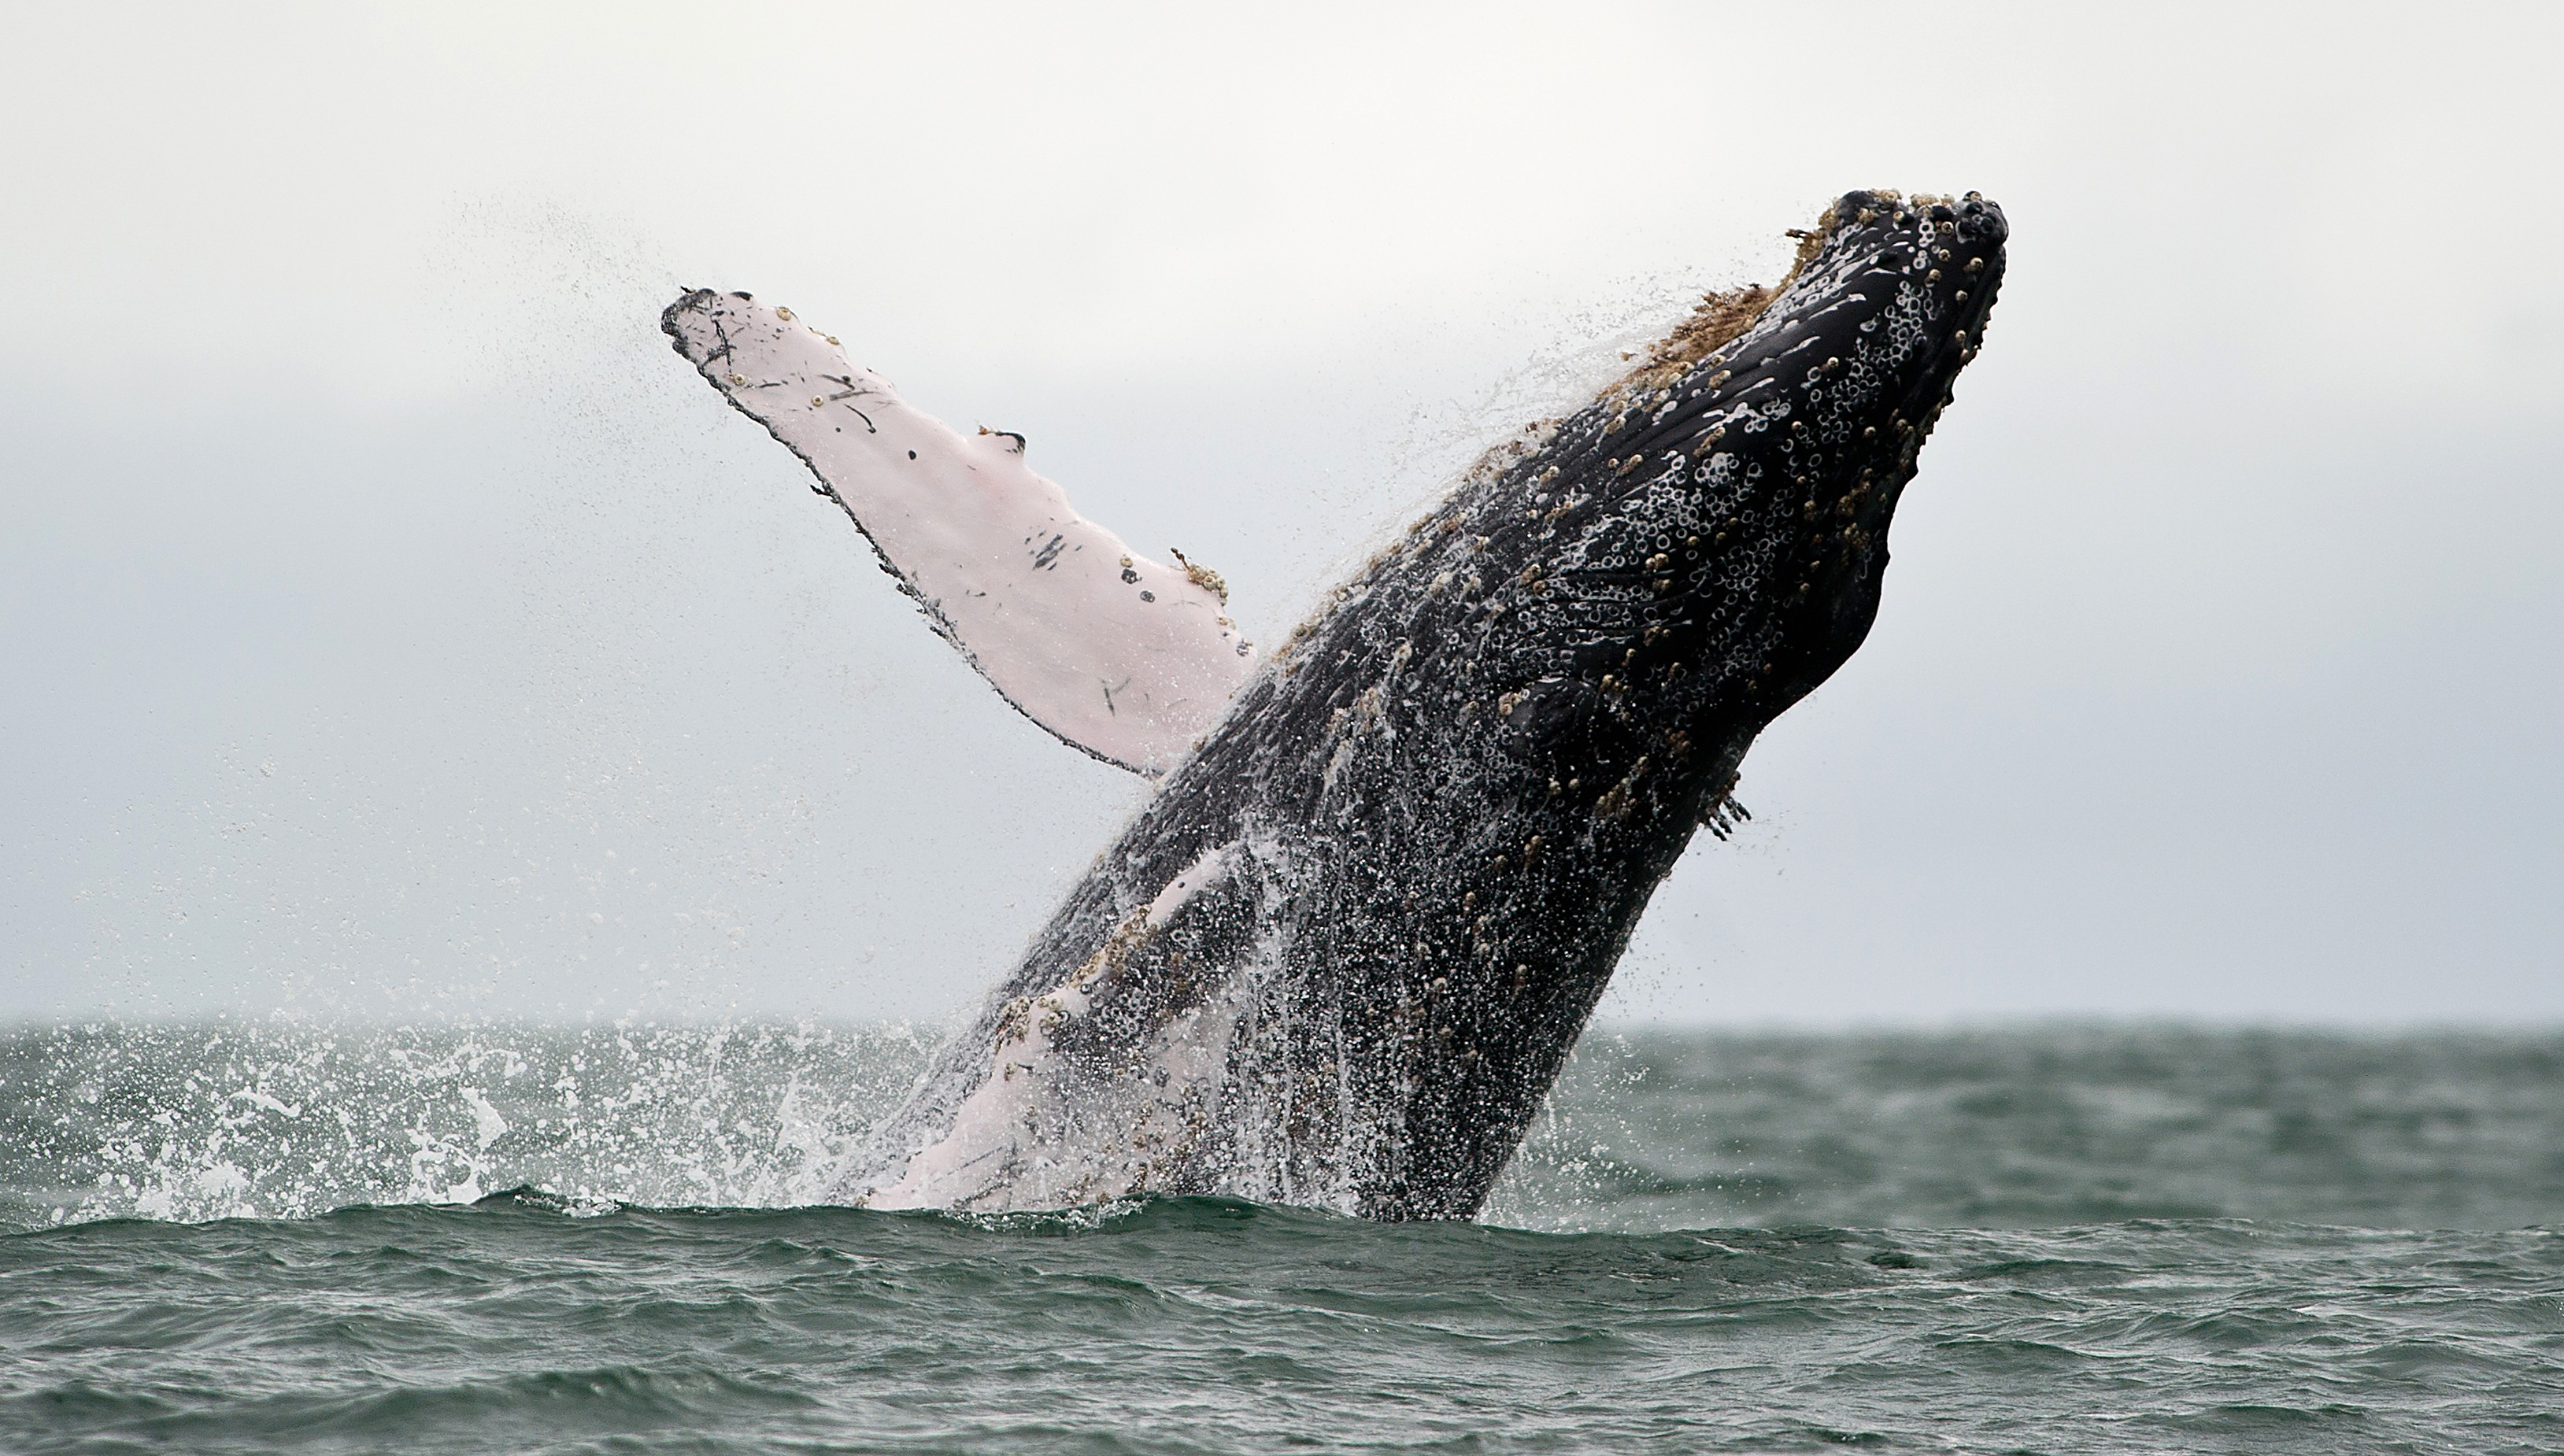 A Humpback whale jumps in the surface of the Pacific Ocean at the Uramba Bahia Malaga natural park in Colombia, on July 16, 2013. (Luis Robayo / Getty Images)